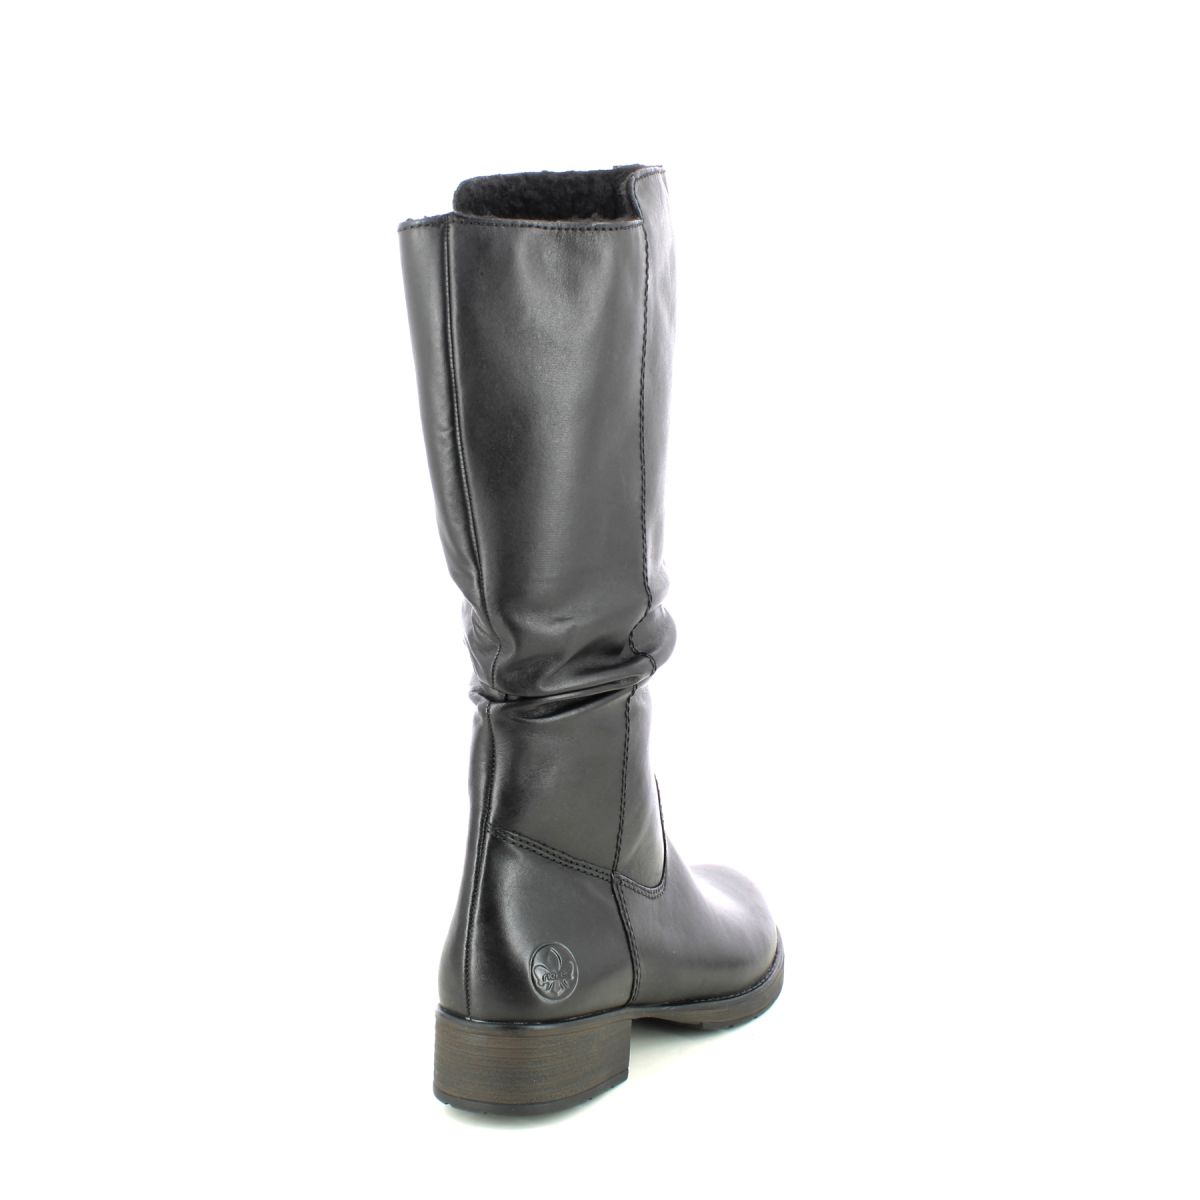 Rieker Z9563-00 Black leather Womens Mid Calf Boots